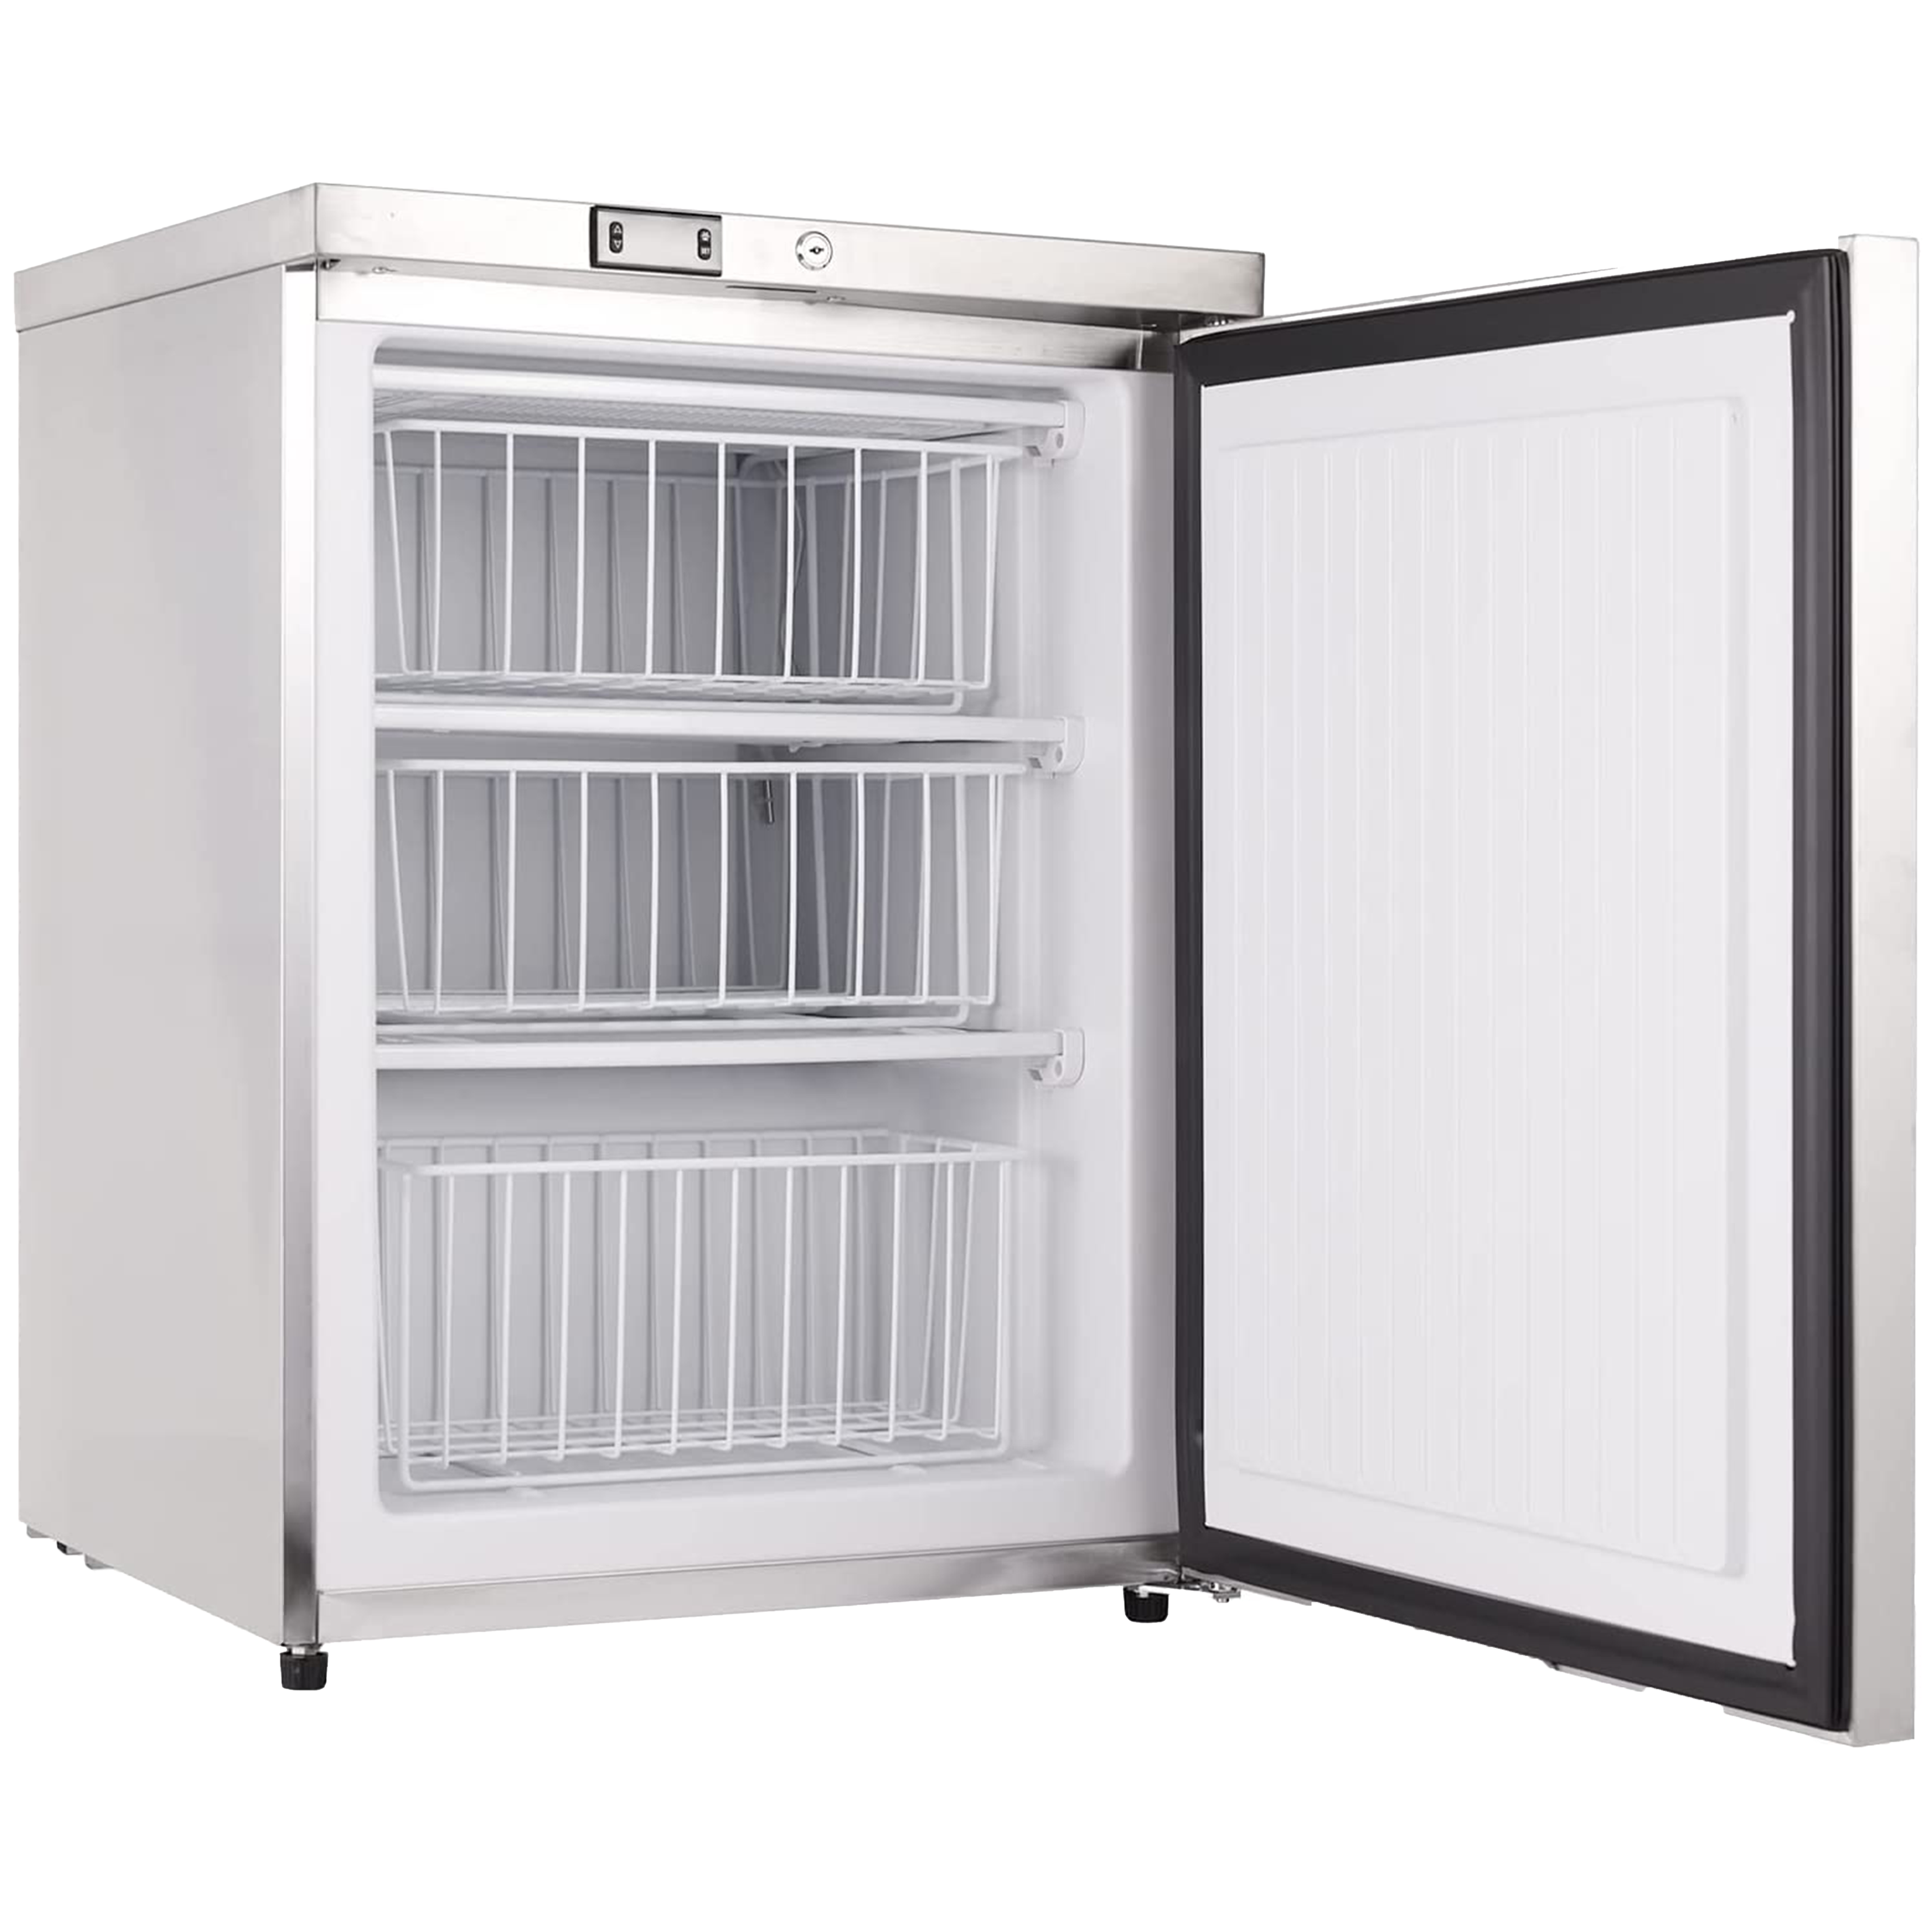 Side view of a 4.1 Cu Ft Food Service Outdoor Beverage Fridge Freezer 128 cans, featuring interior space with three drawers